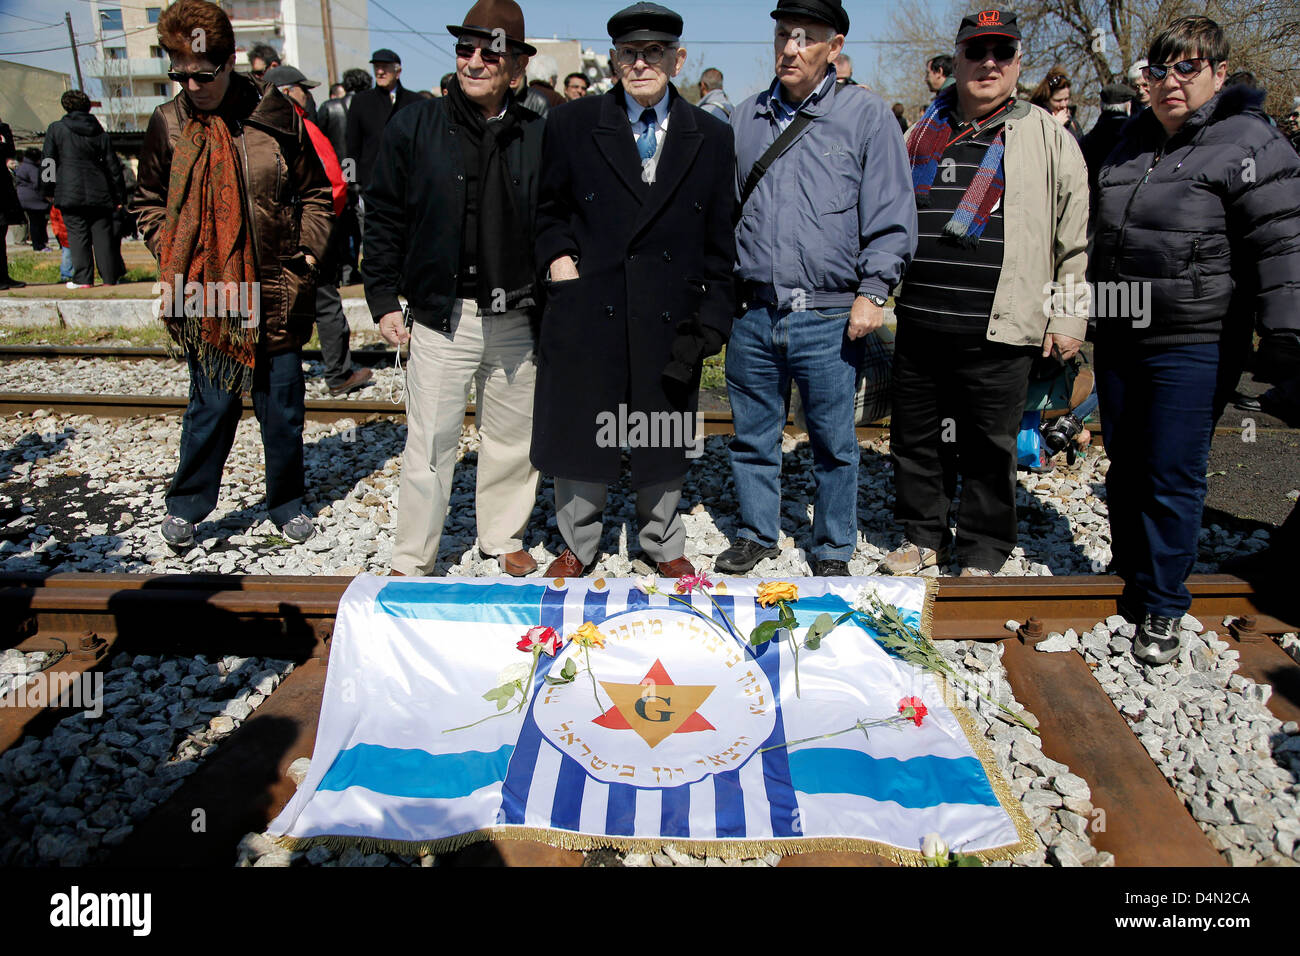 Jews strew flowers on the rails of the old railway station in Thessaloniki where the first train left Greece's northern city heading for the Auschwitz concentration camp on March 15, 1943. Commemorative march for the 70th anniversary from the departure of the first train from Thessaloniki to the camps of the Nazis at Auschwitz. Starting point, the Holocaust memorial in Eleftherias (Liberty) Square and destination the old railway station where the first train departed with the Jews of Thessaloniki. Thessaloniki, Greece. March 16, 2013. Greece's second largest city is commemorating the 70th anni Stock Photo